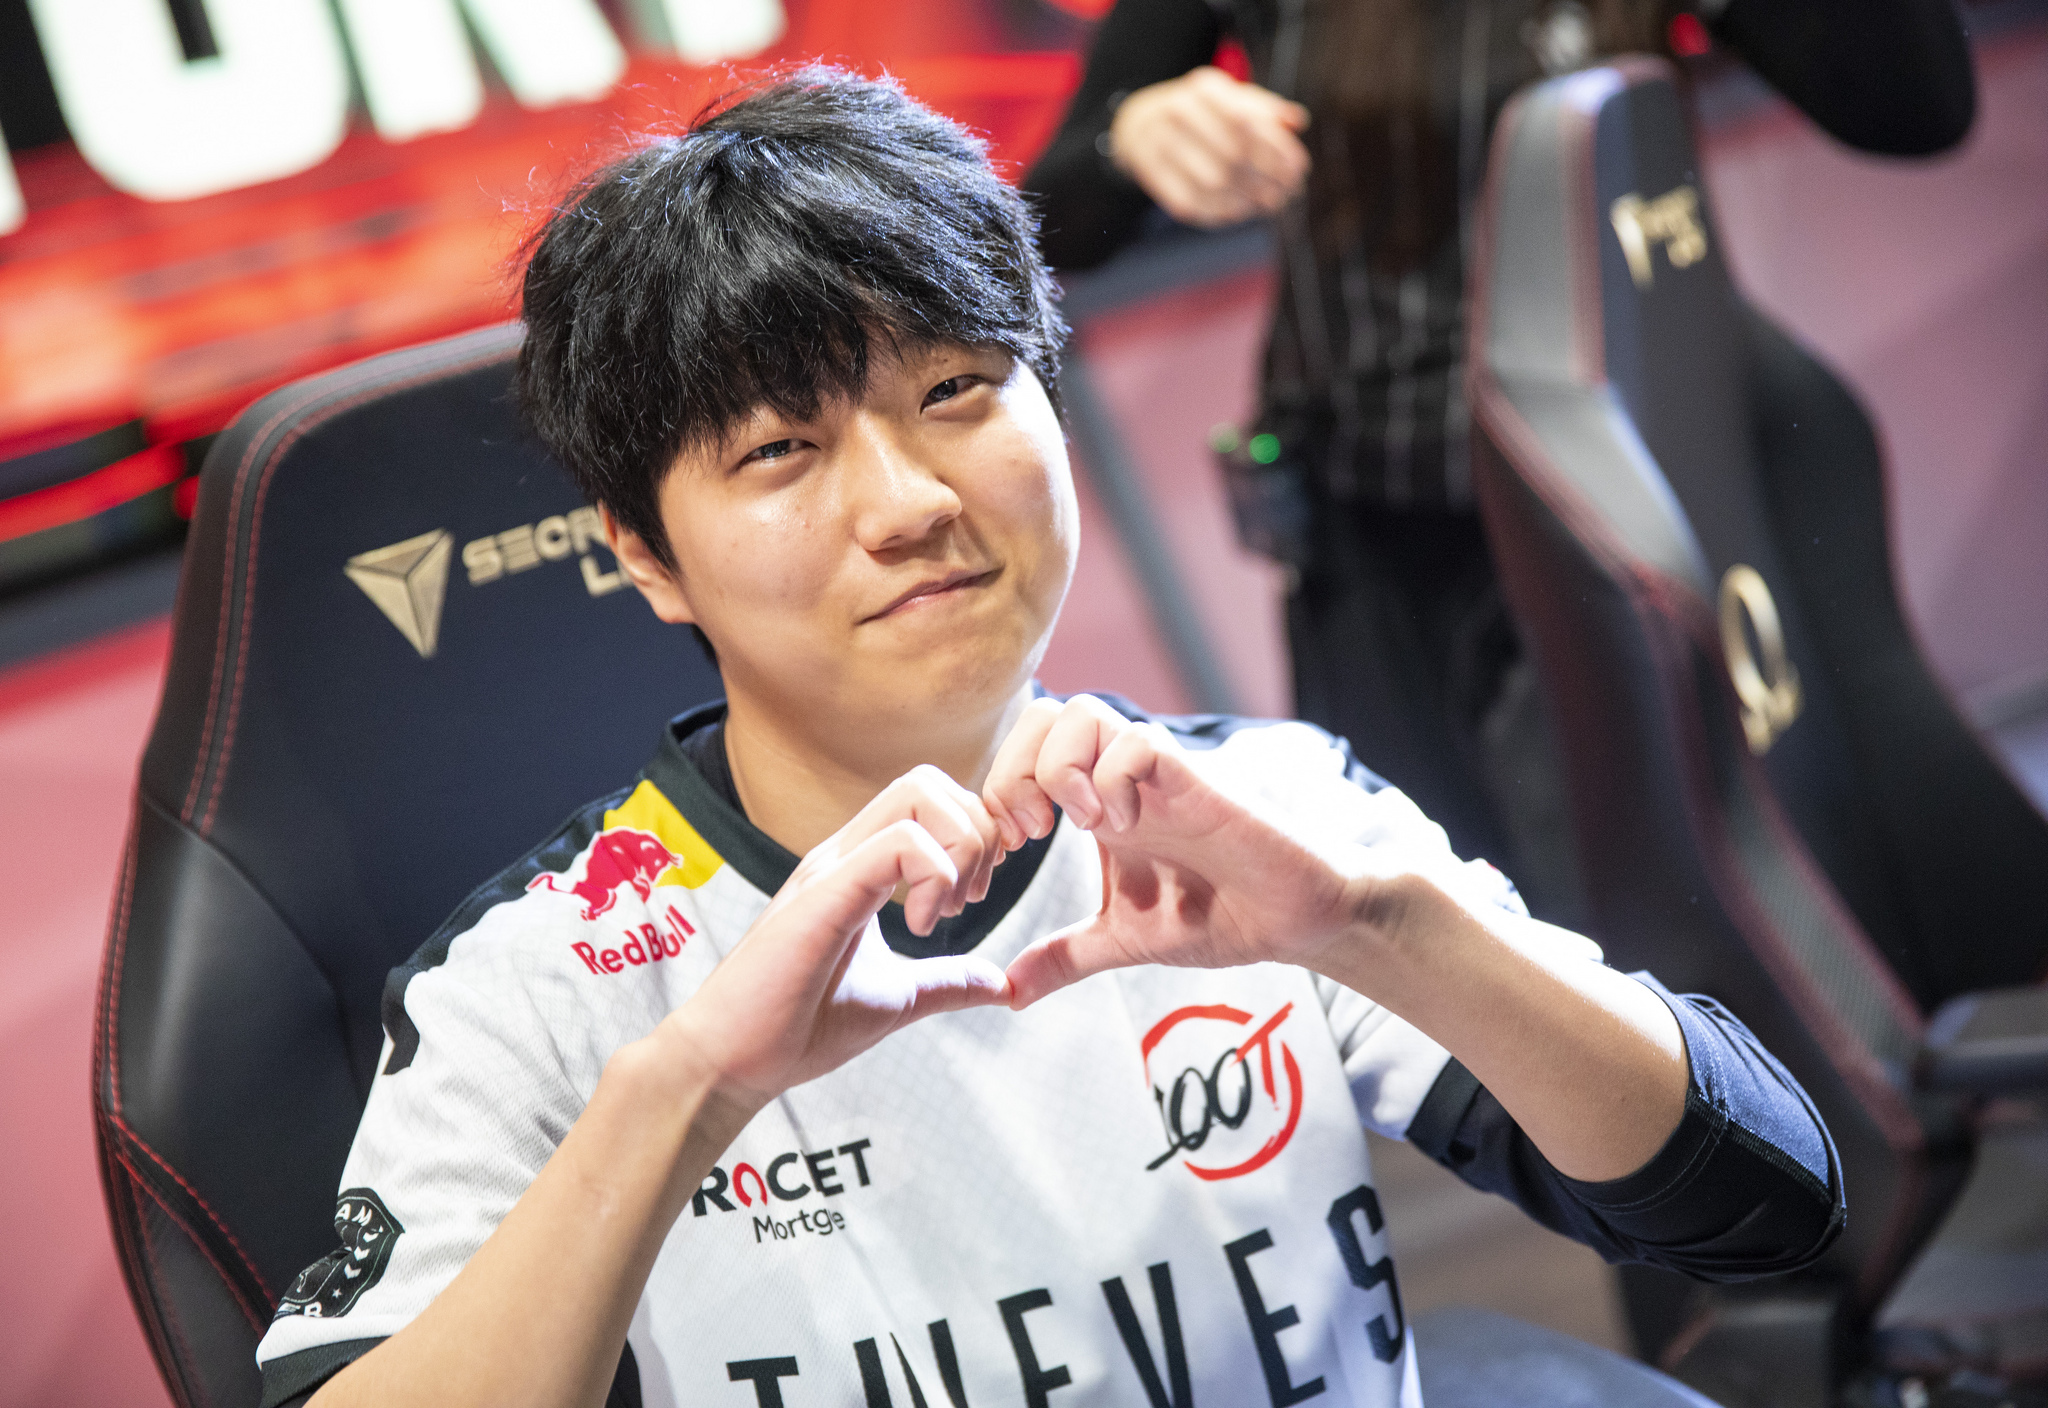 Ssumday competing on stage in the LCS, making a heart shape with his hands.